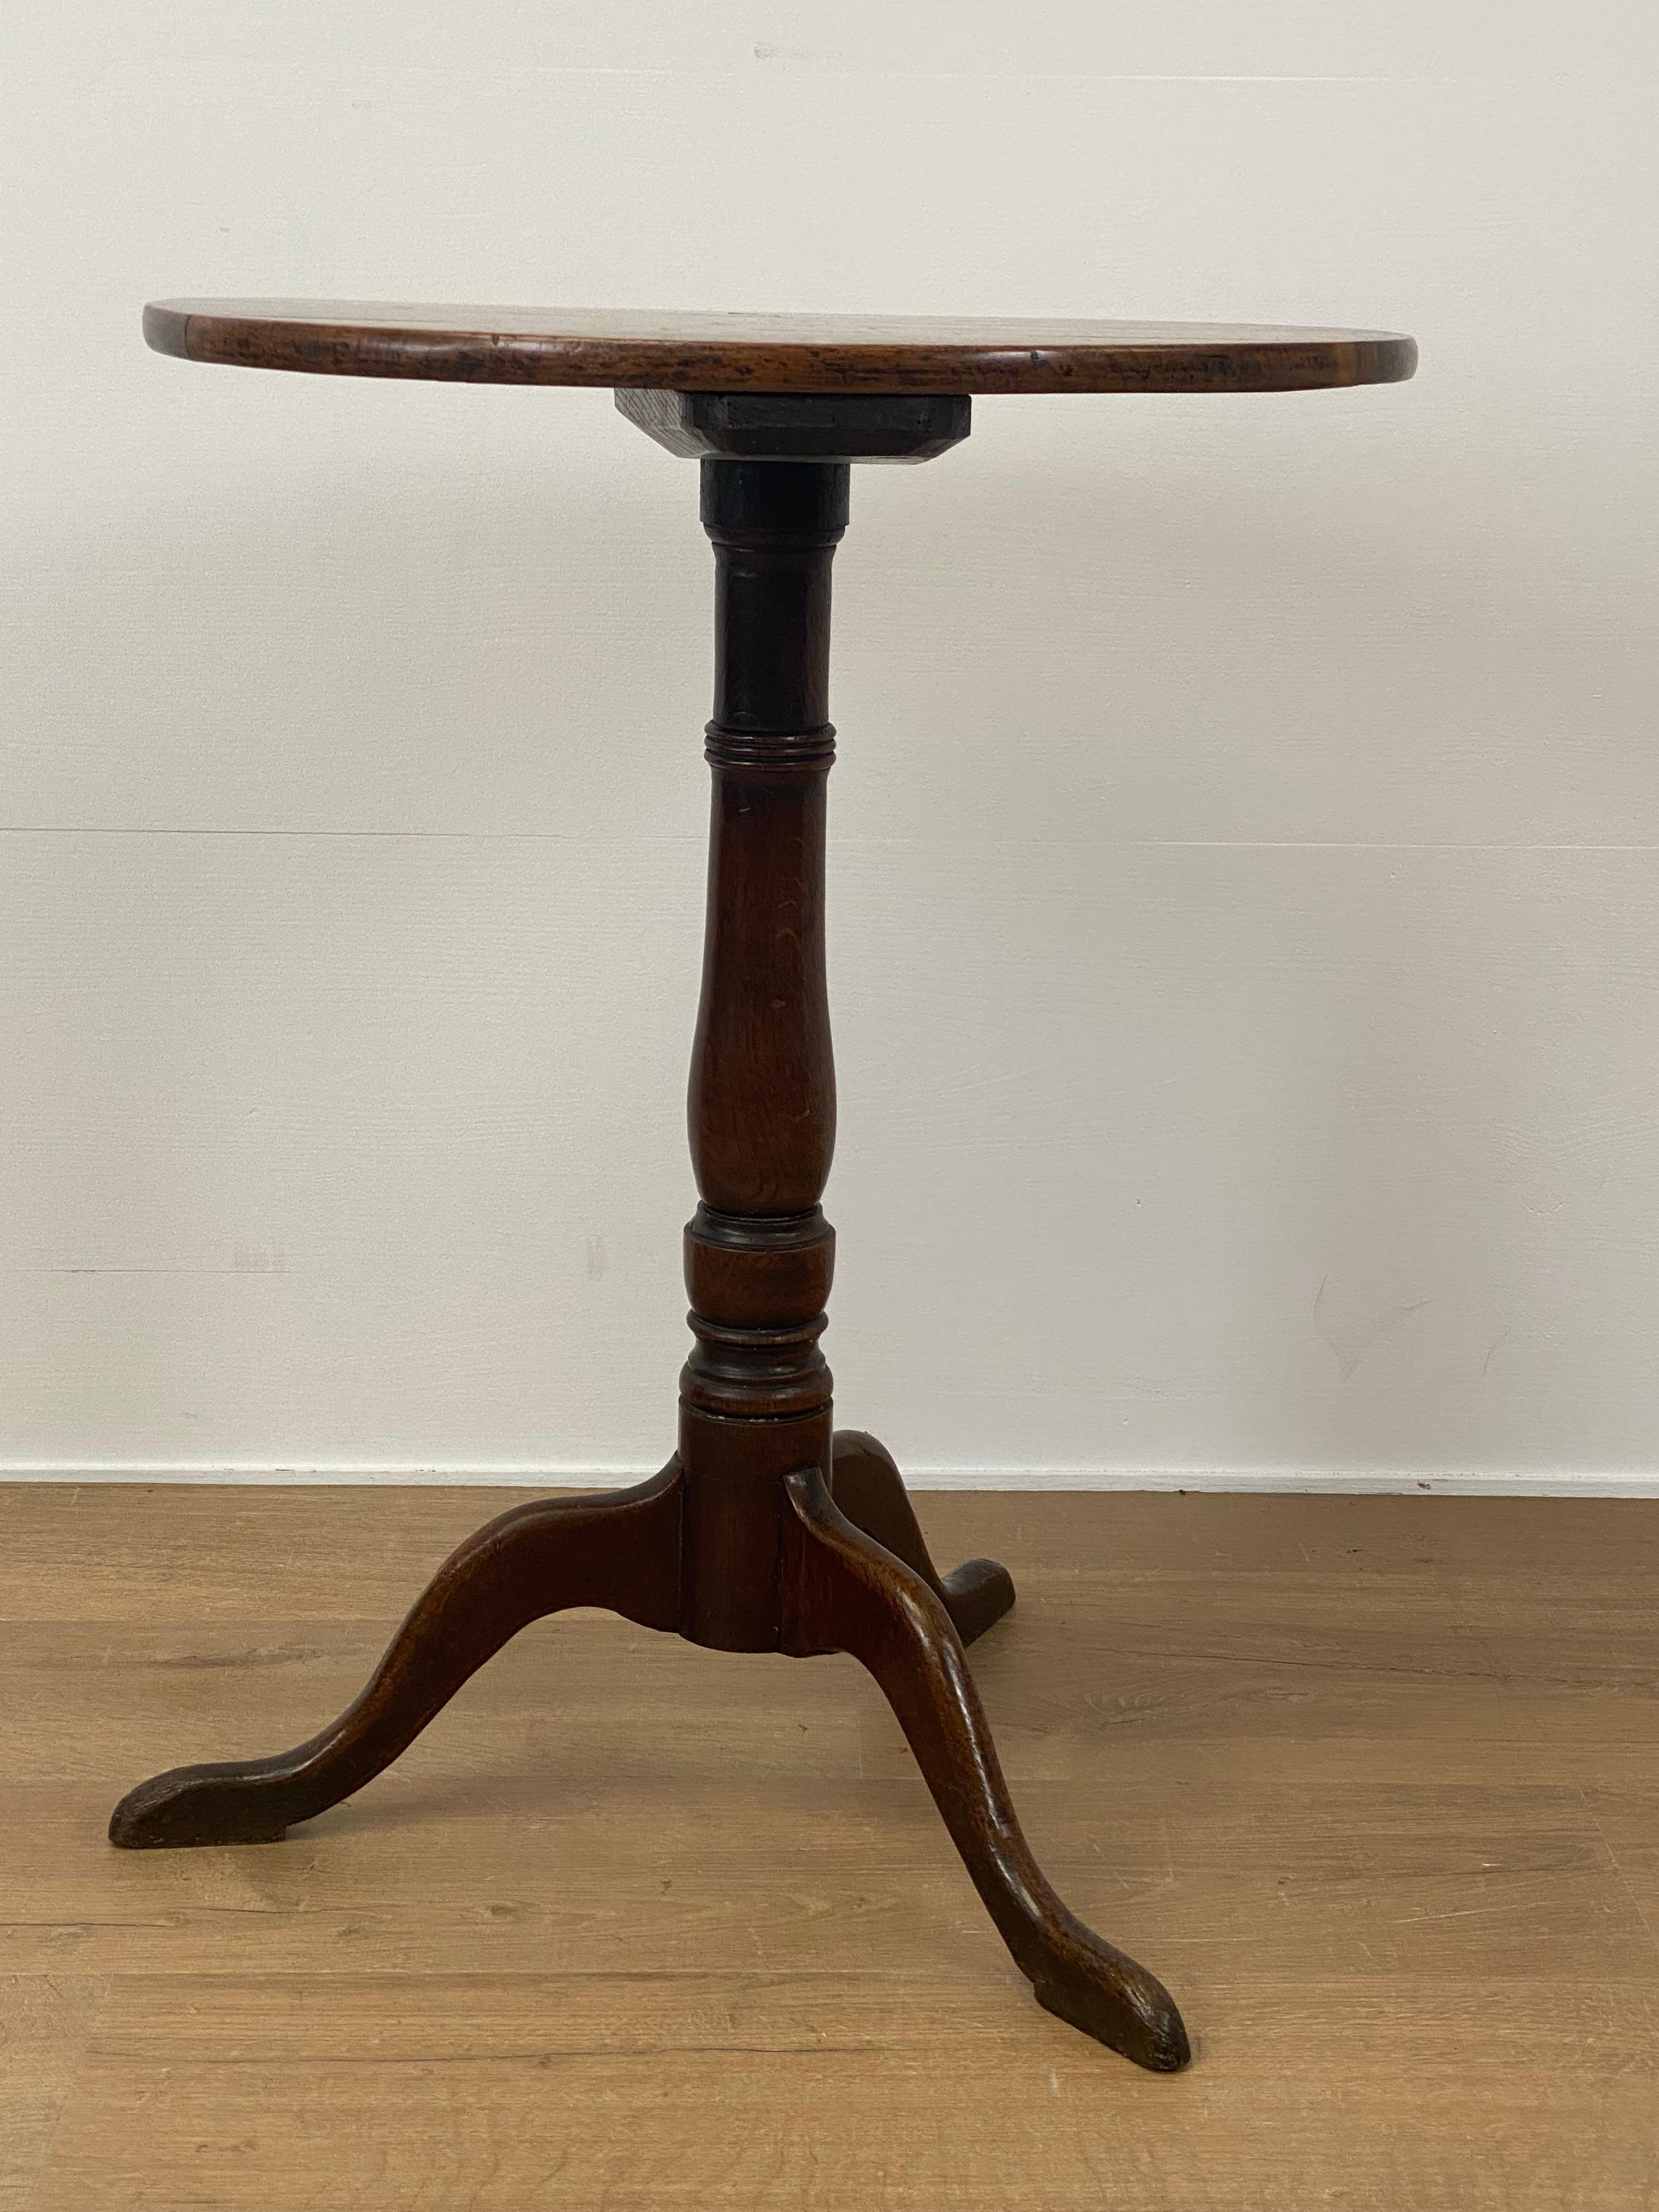 Antique, English Tripod Table in Oak In Excellent Condition For Sale In Schellebelle, BE